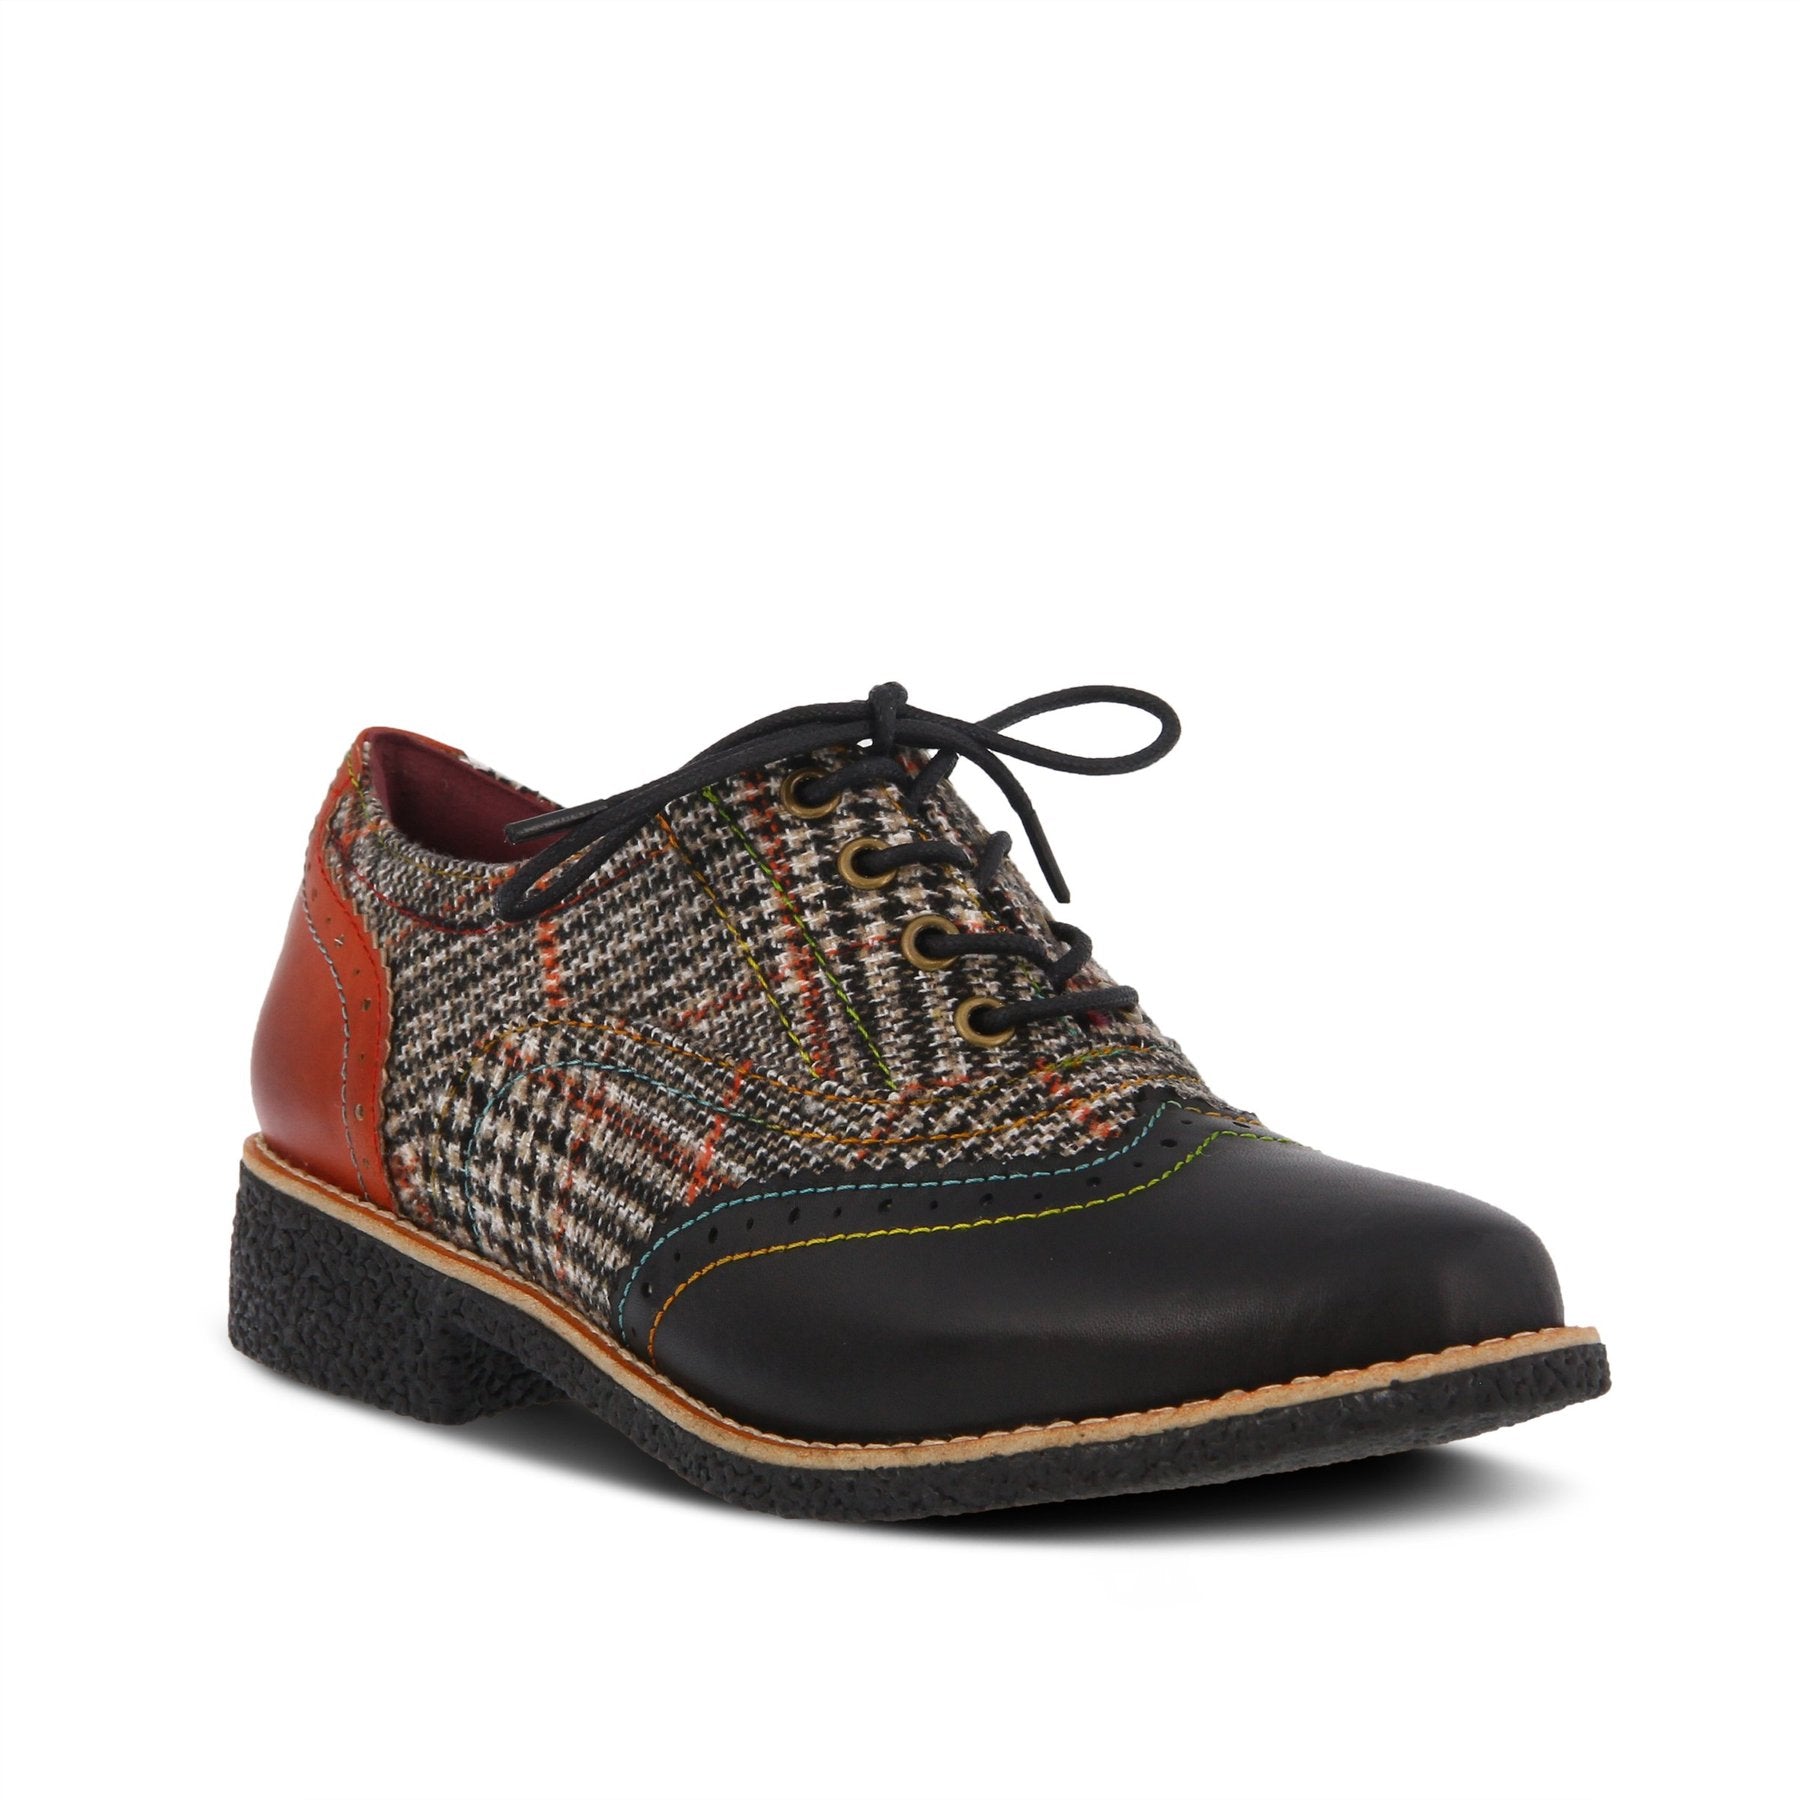 Outer front side view of the l'artiste muggiasti shoe. This oxford shoe has a lace up front, red leather on the heel, black leather over the toes, and a mix of red and black plaid fabric in between.